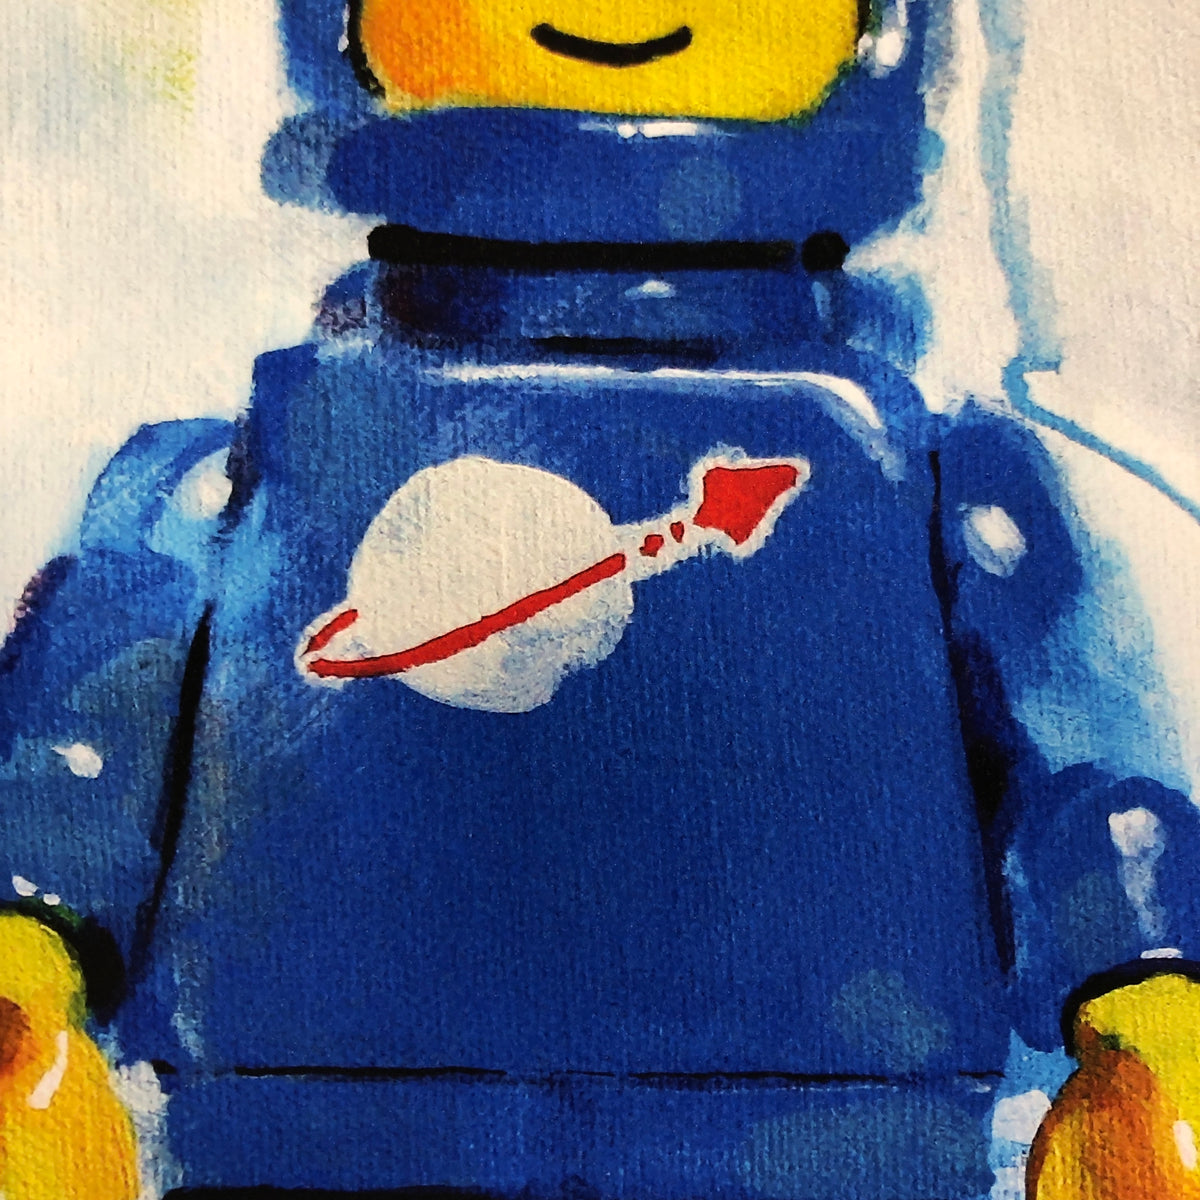 Lego-Blue by James Paterson